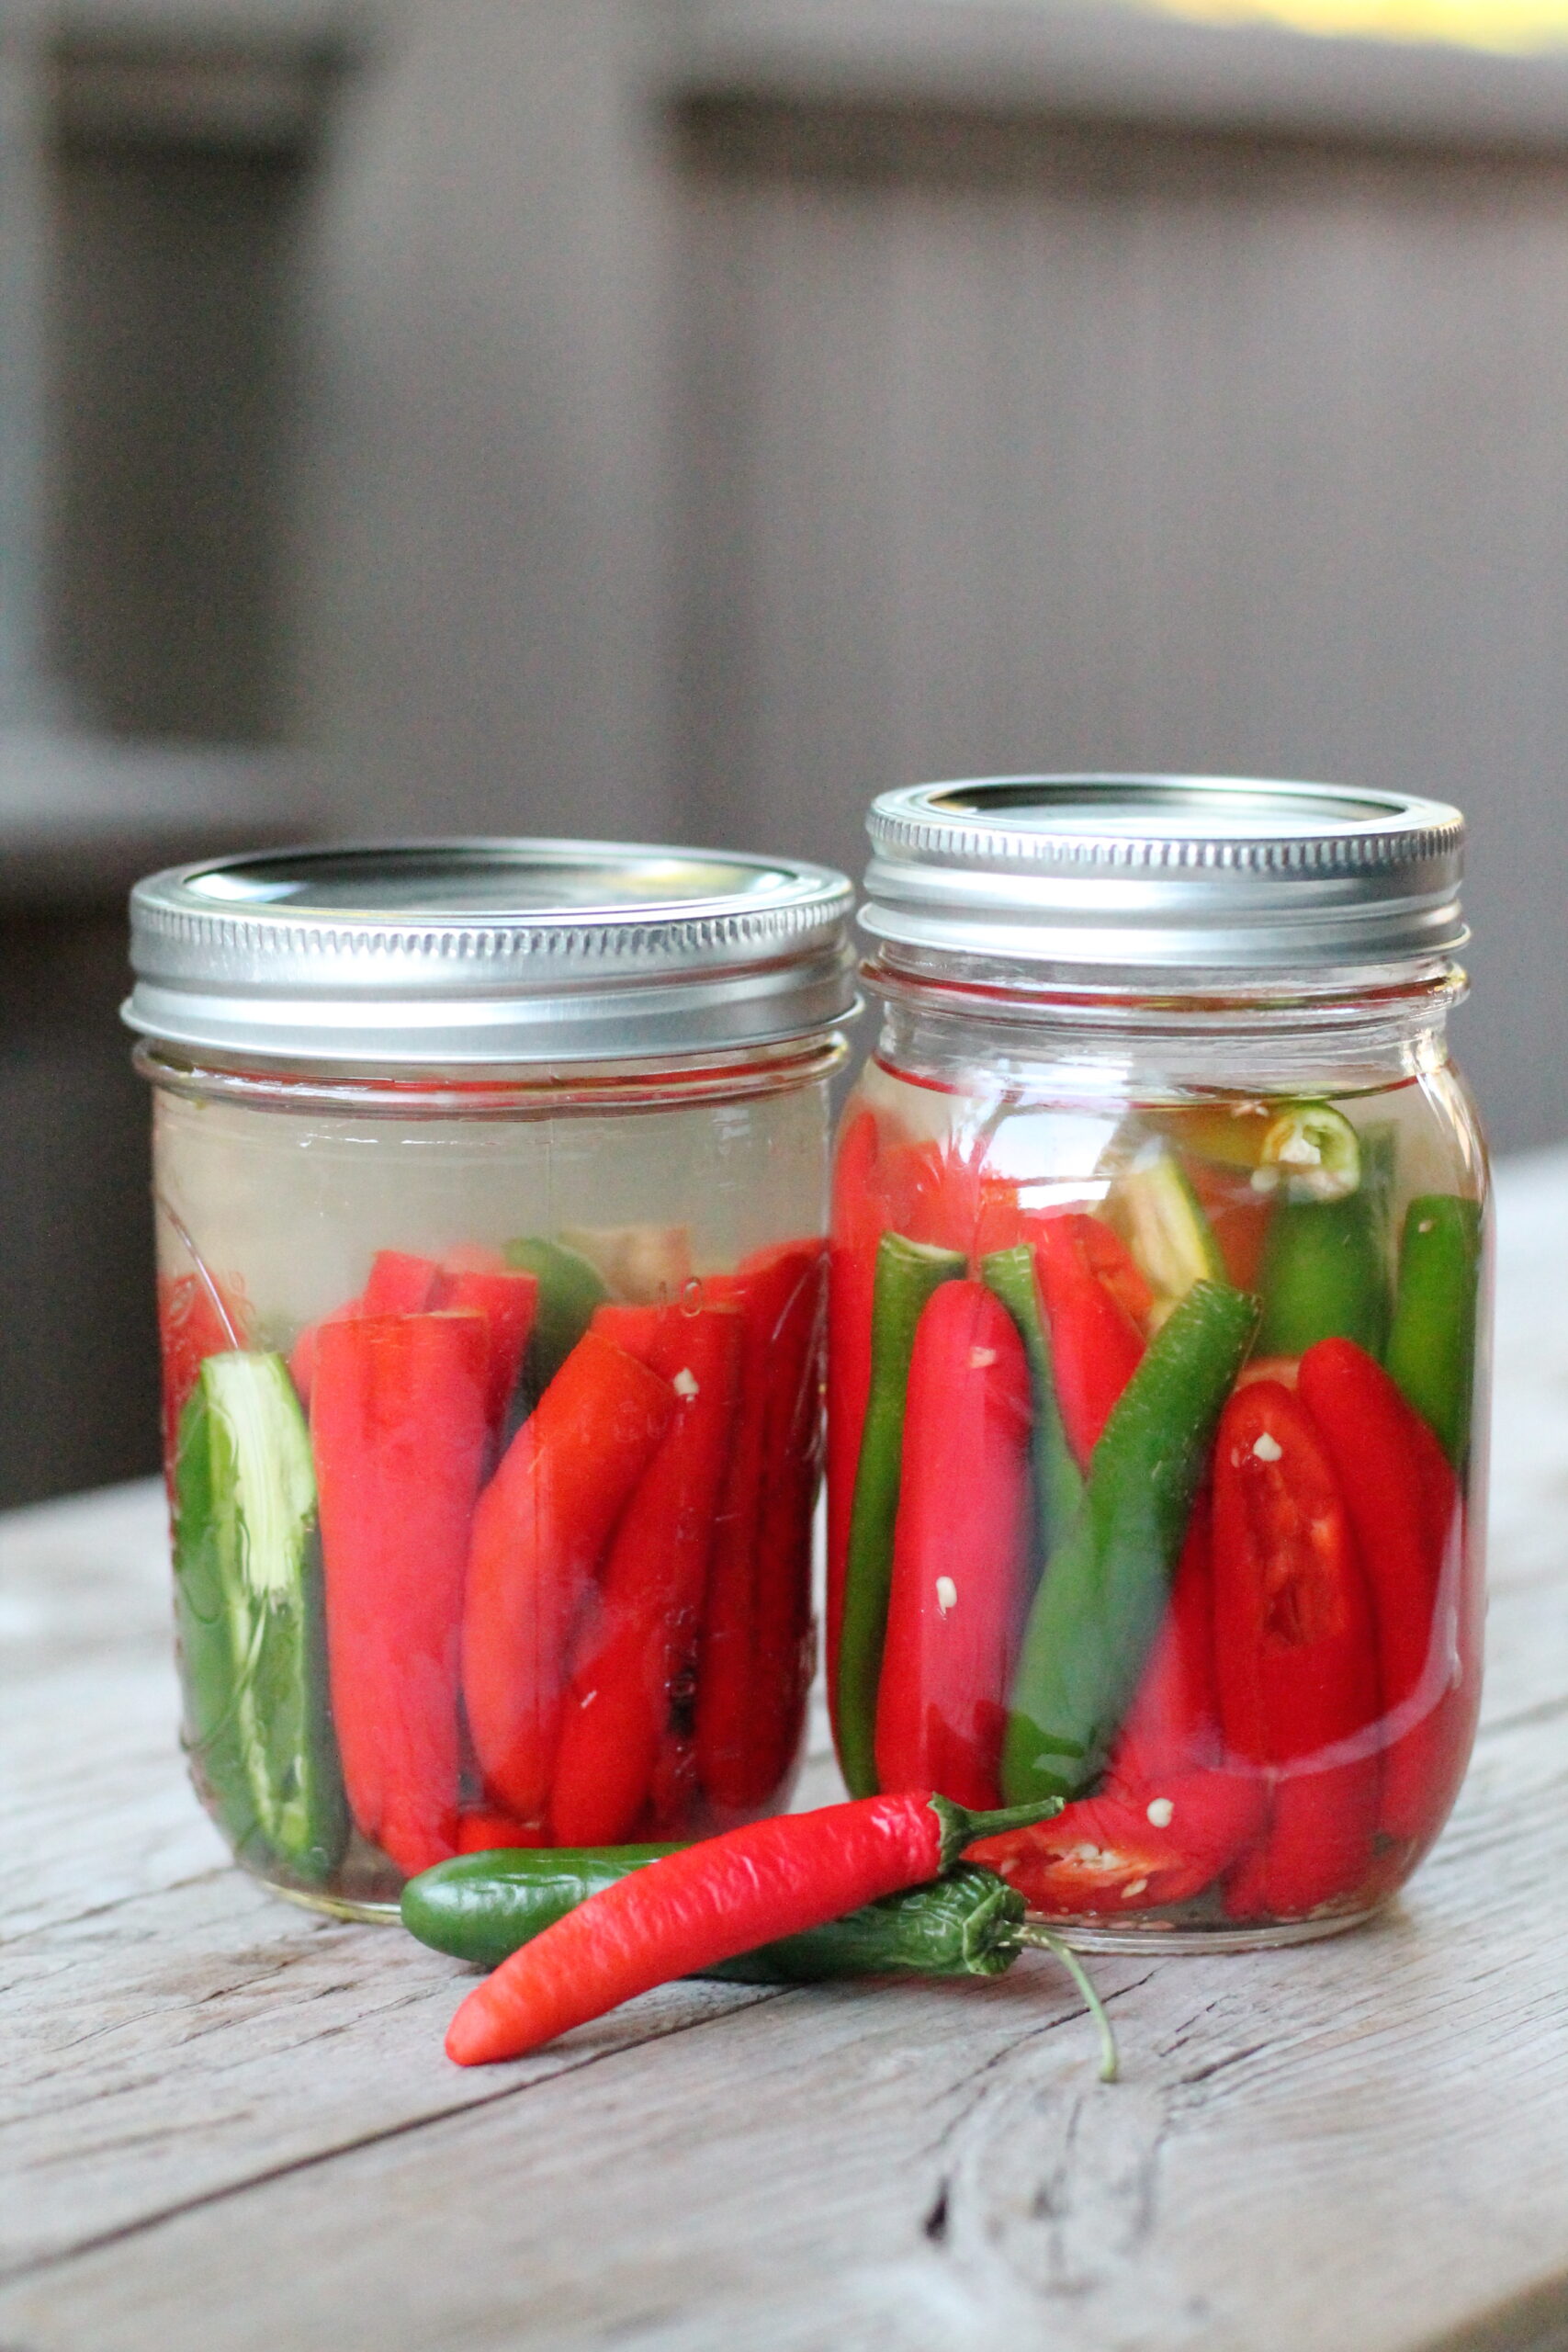 Two jars of red and green hot peppers